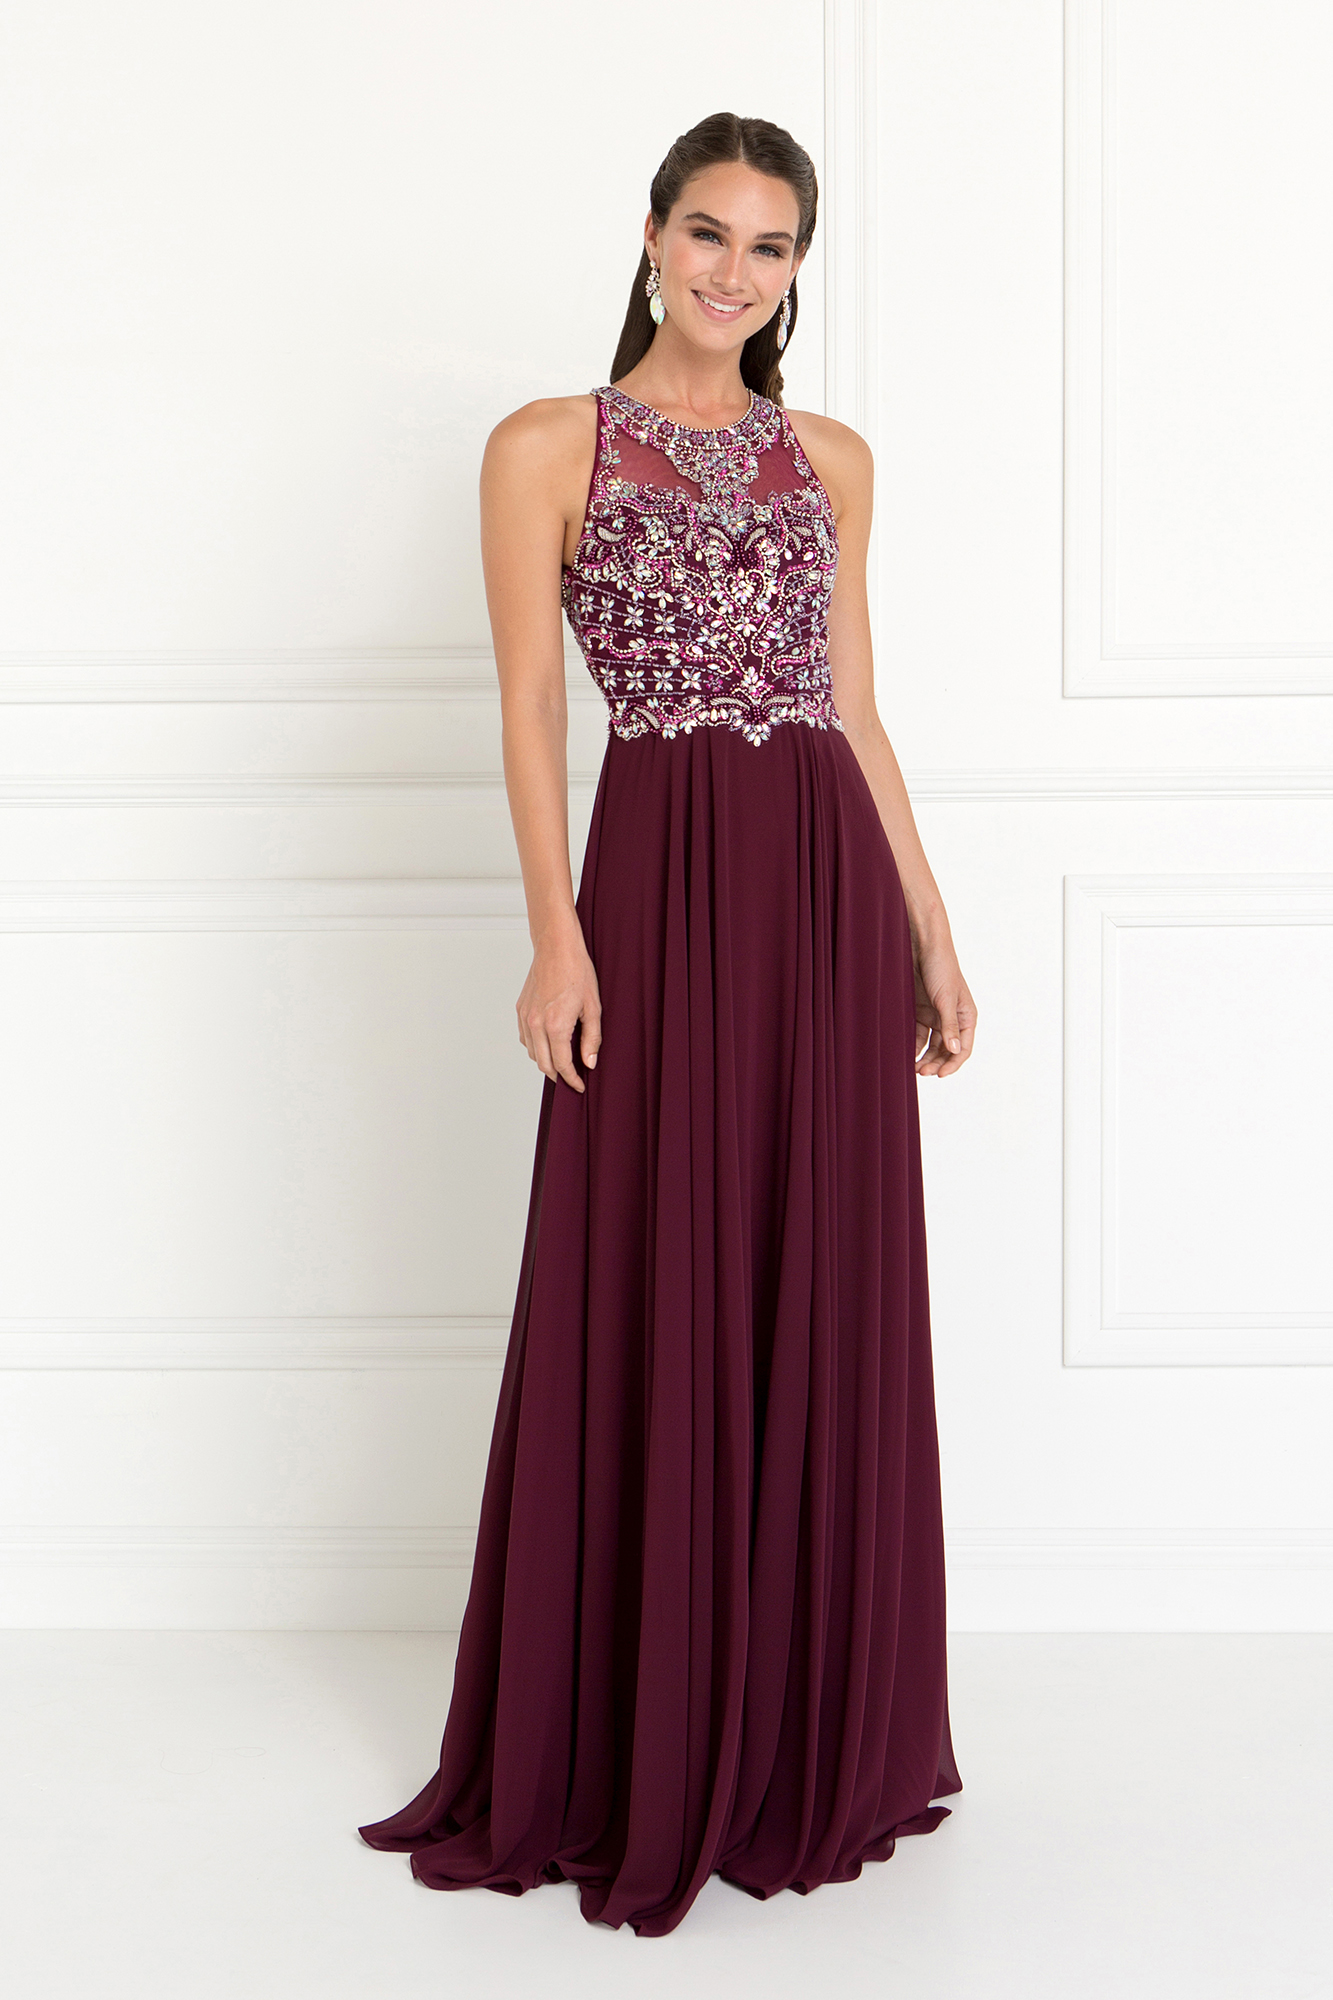 woman in burgundy embellished gown